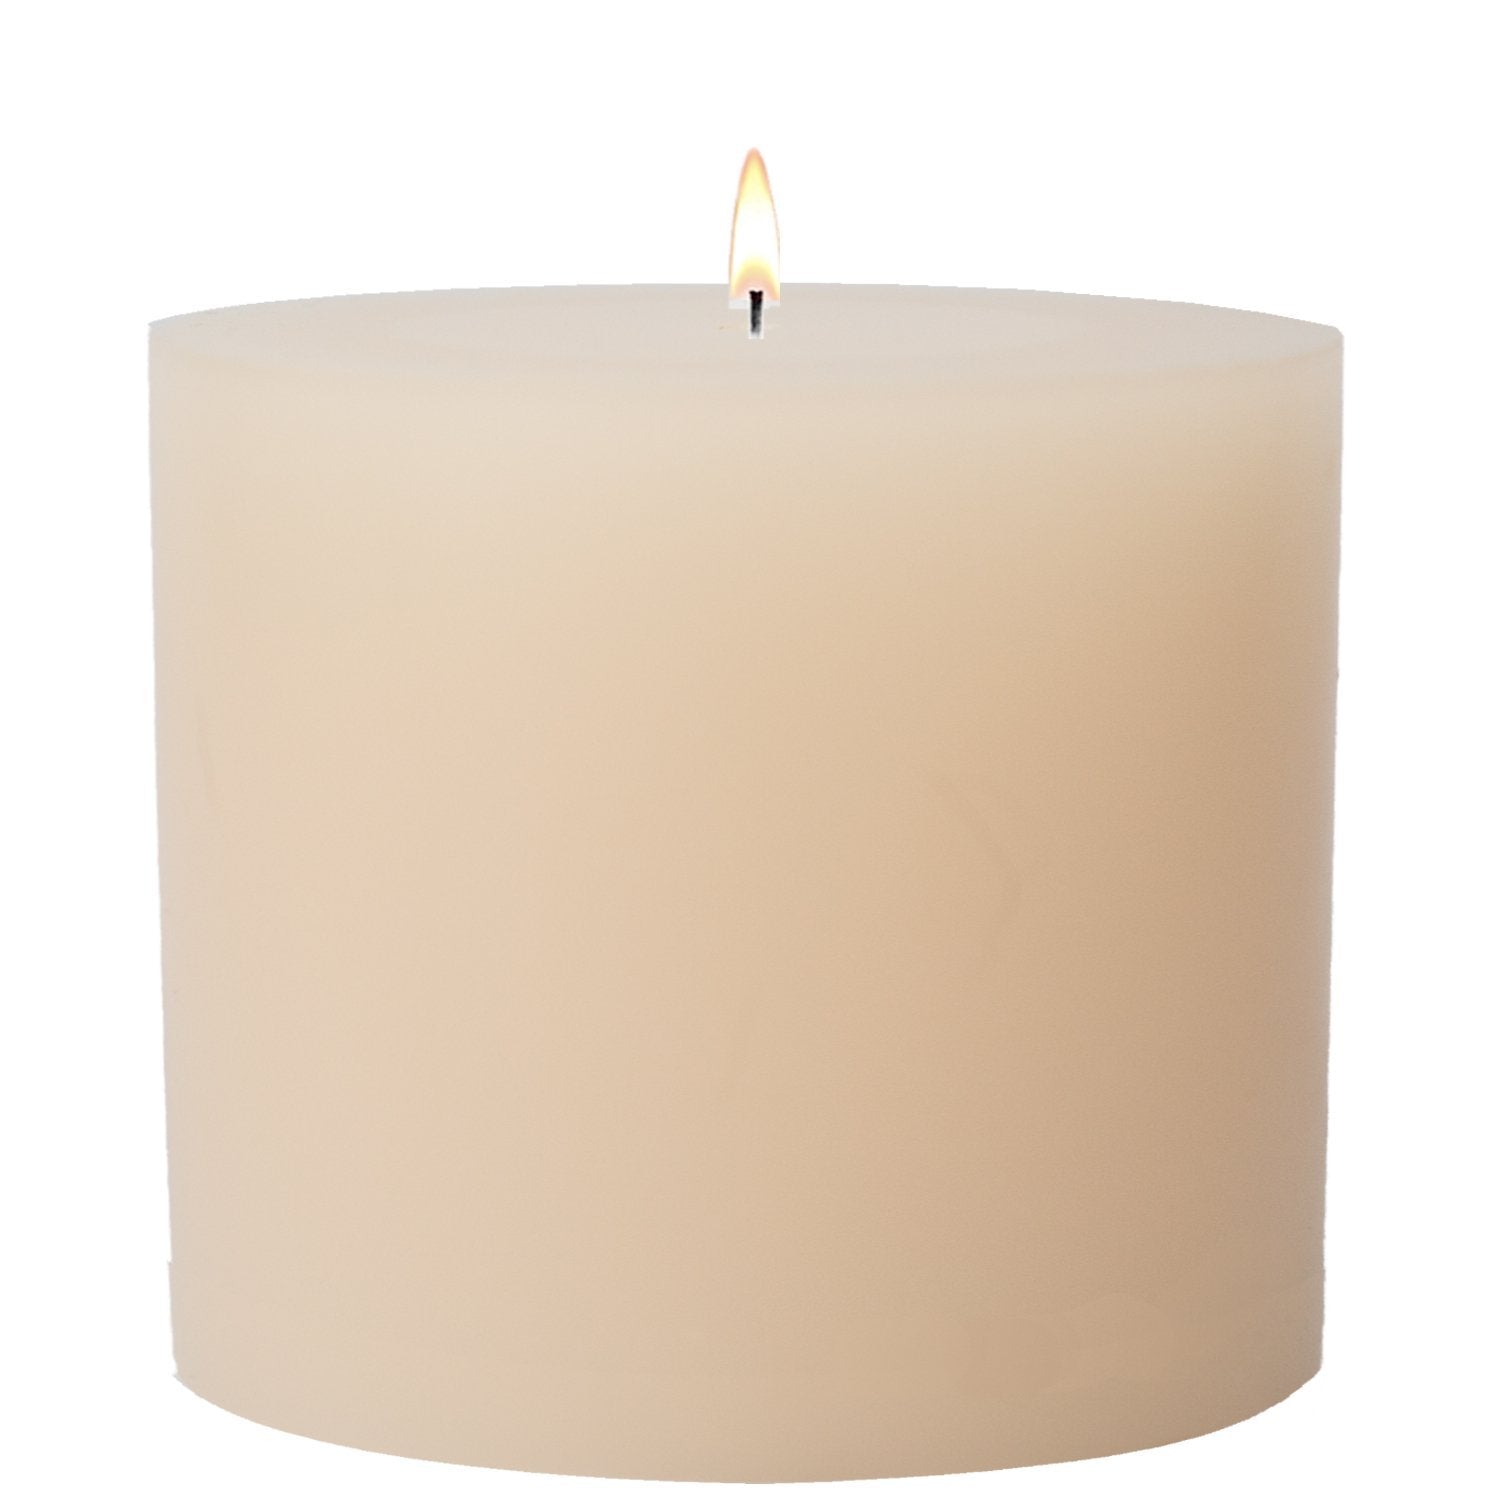 Stone Candles Unscented Pillar Ivory 4x4